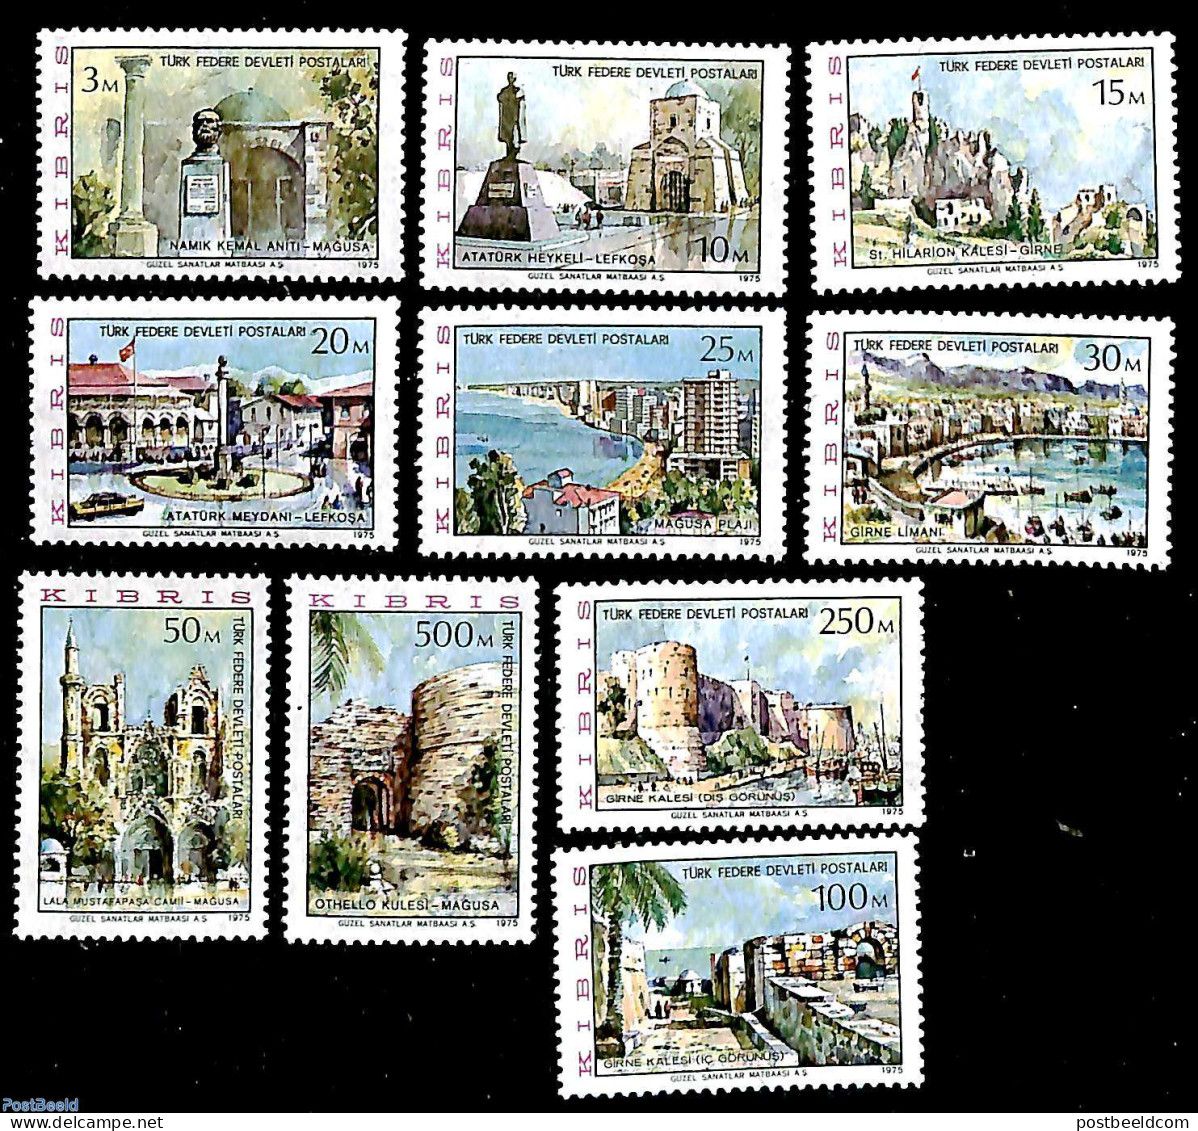 Turkish Cyprus 1975 Definitives 10v, Mint NH, Art - Architecture - Castles & Fortifications - Châteaux